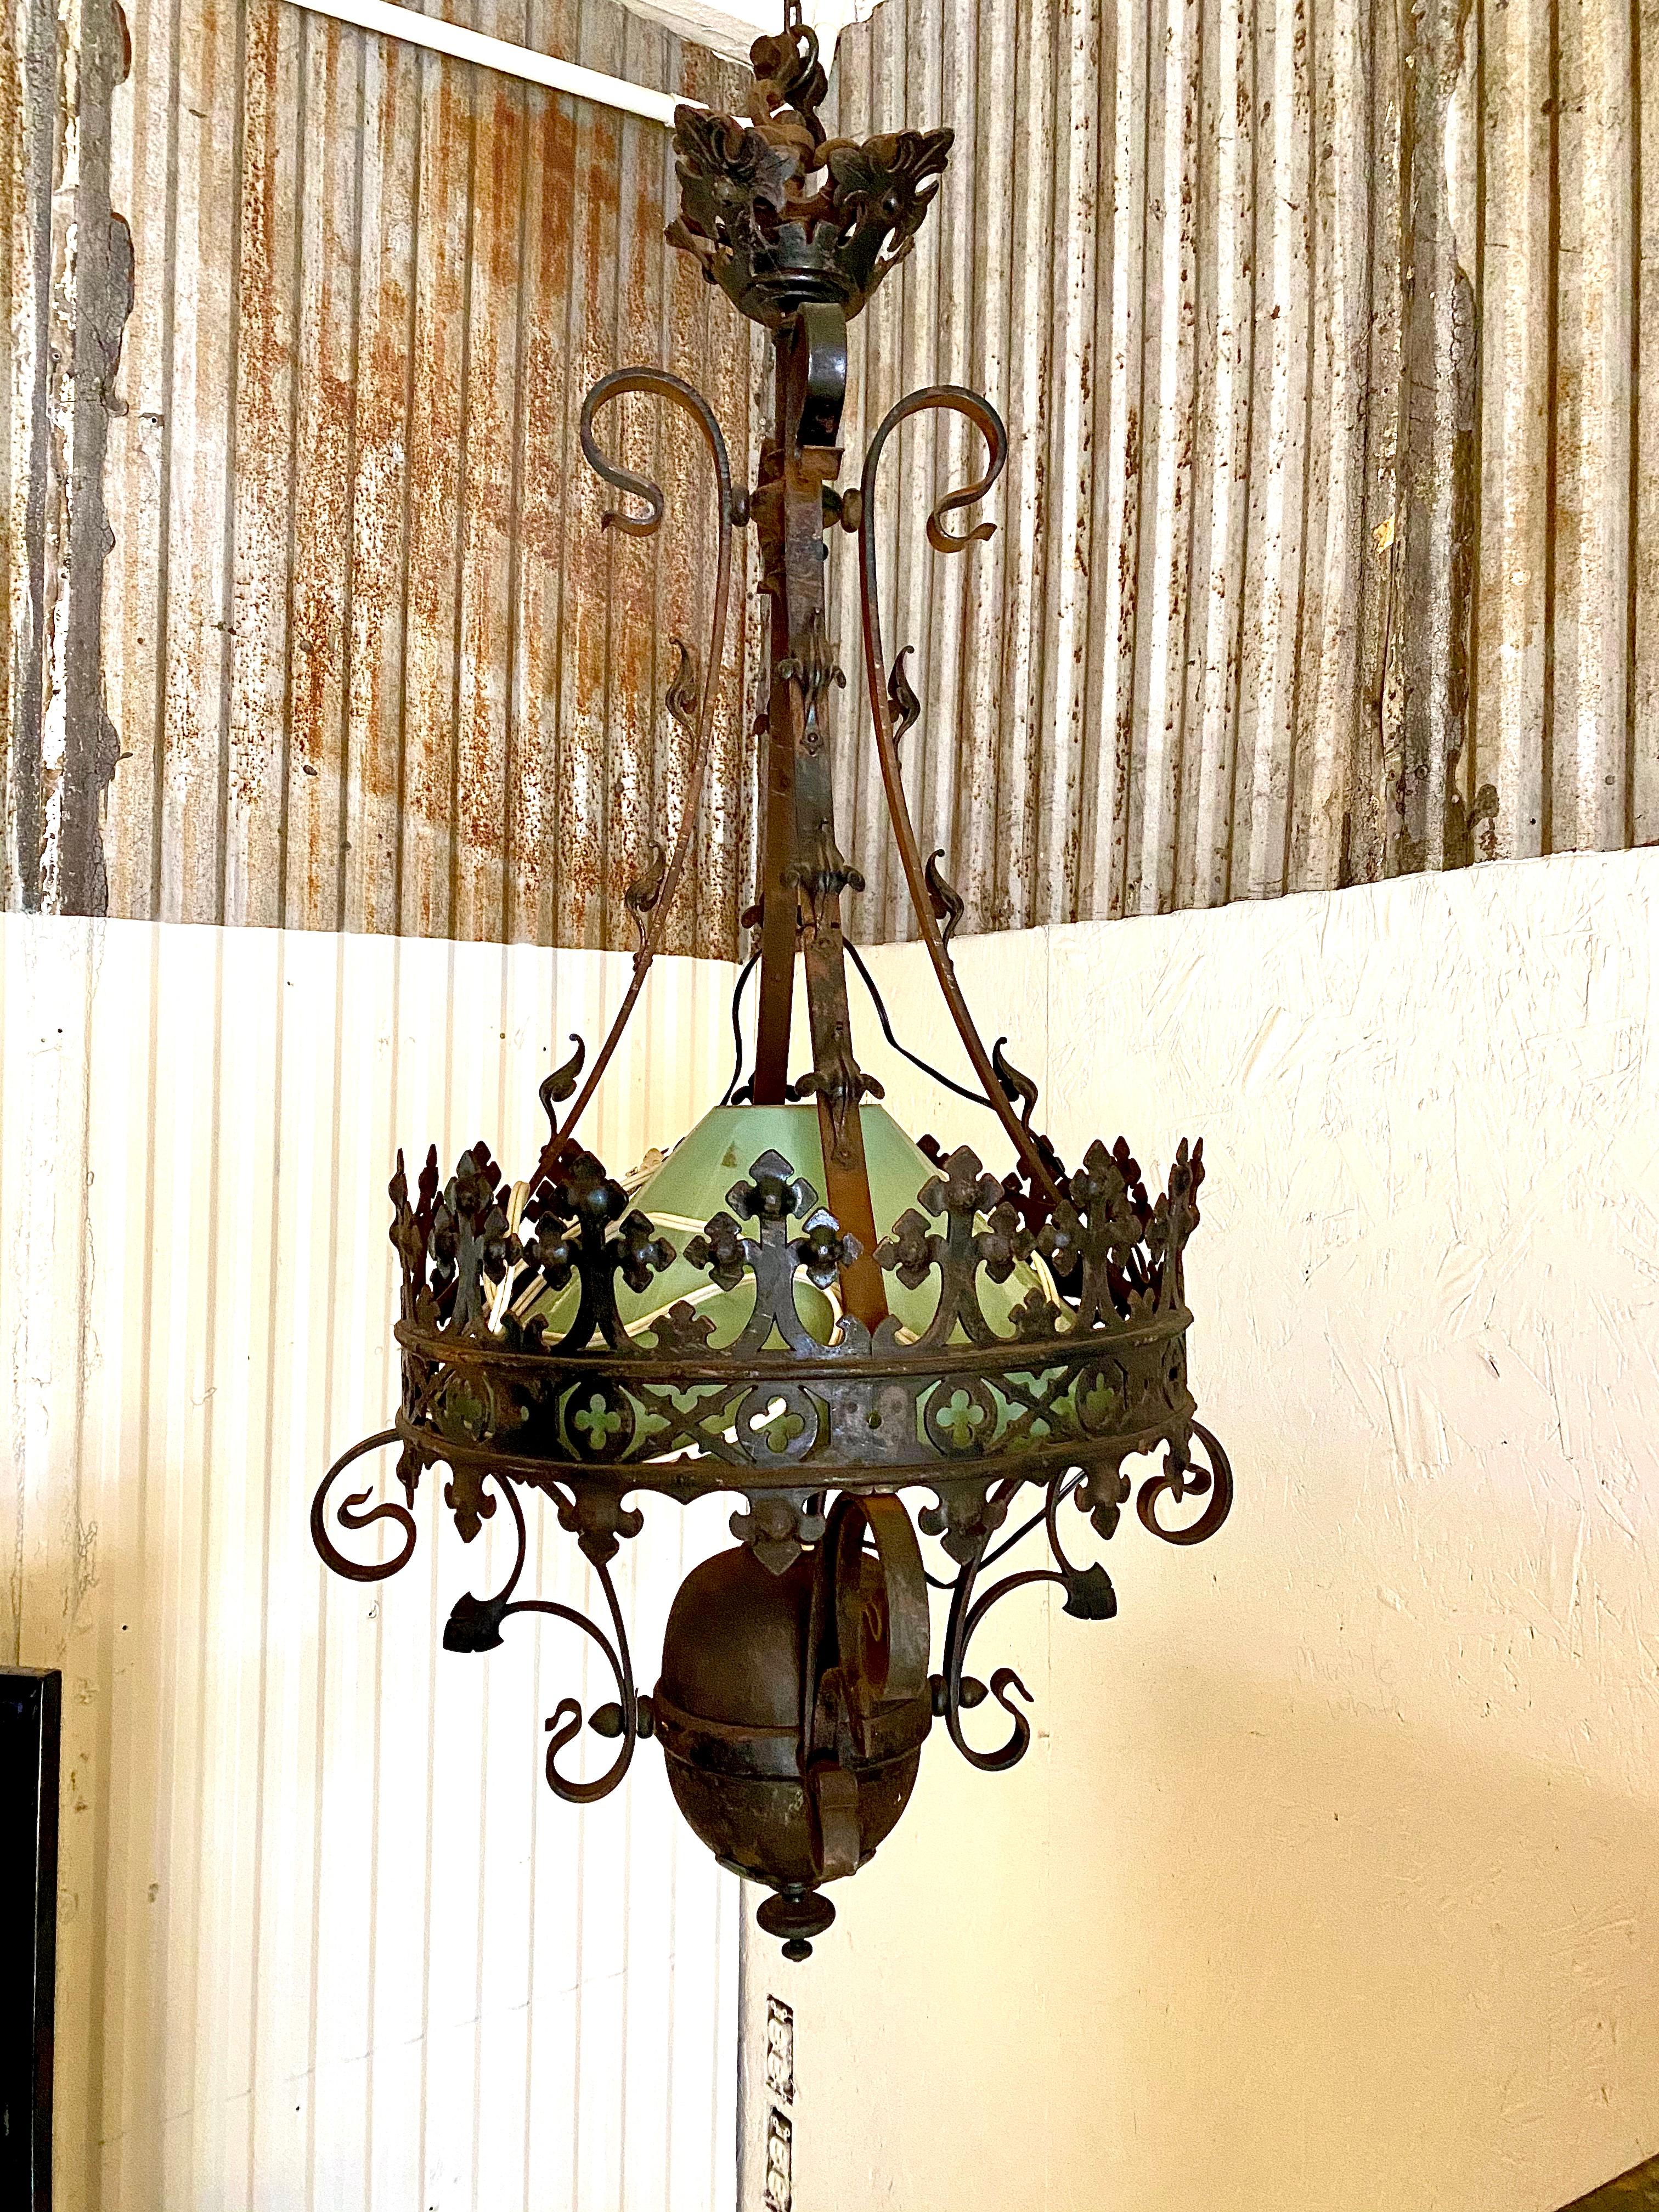 This wrought iron American Gothic light was originally an oil lamp from the 1880s. The light was turned into an electrical chandelier around the 1920s. This light is exquisite and has the original milk glass shade and a profusion of handwrought